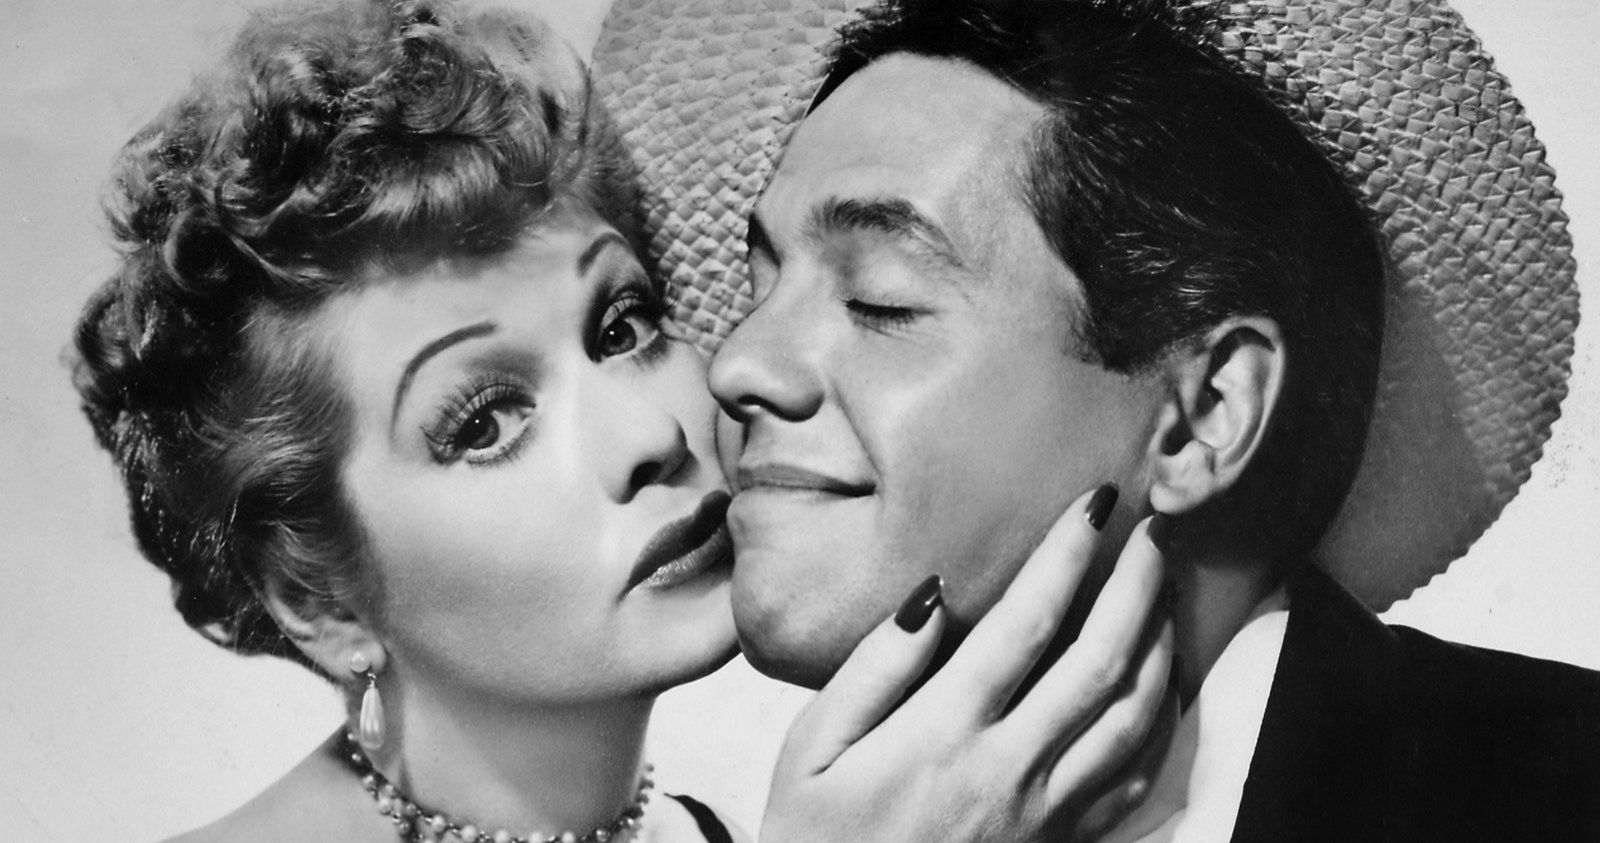 I Love Lucy Movie Being the Ricardos Begins Production with Nicole Kidman, Javier Bardem